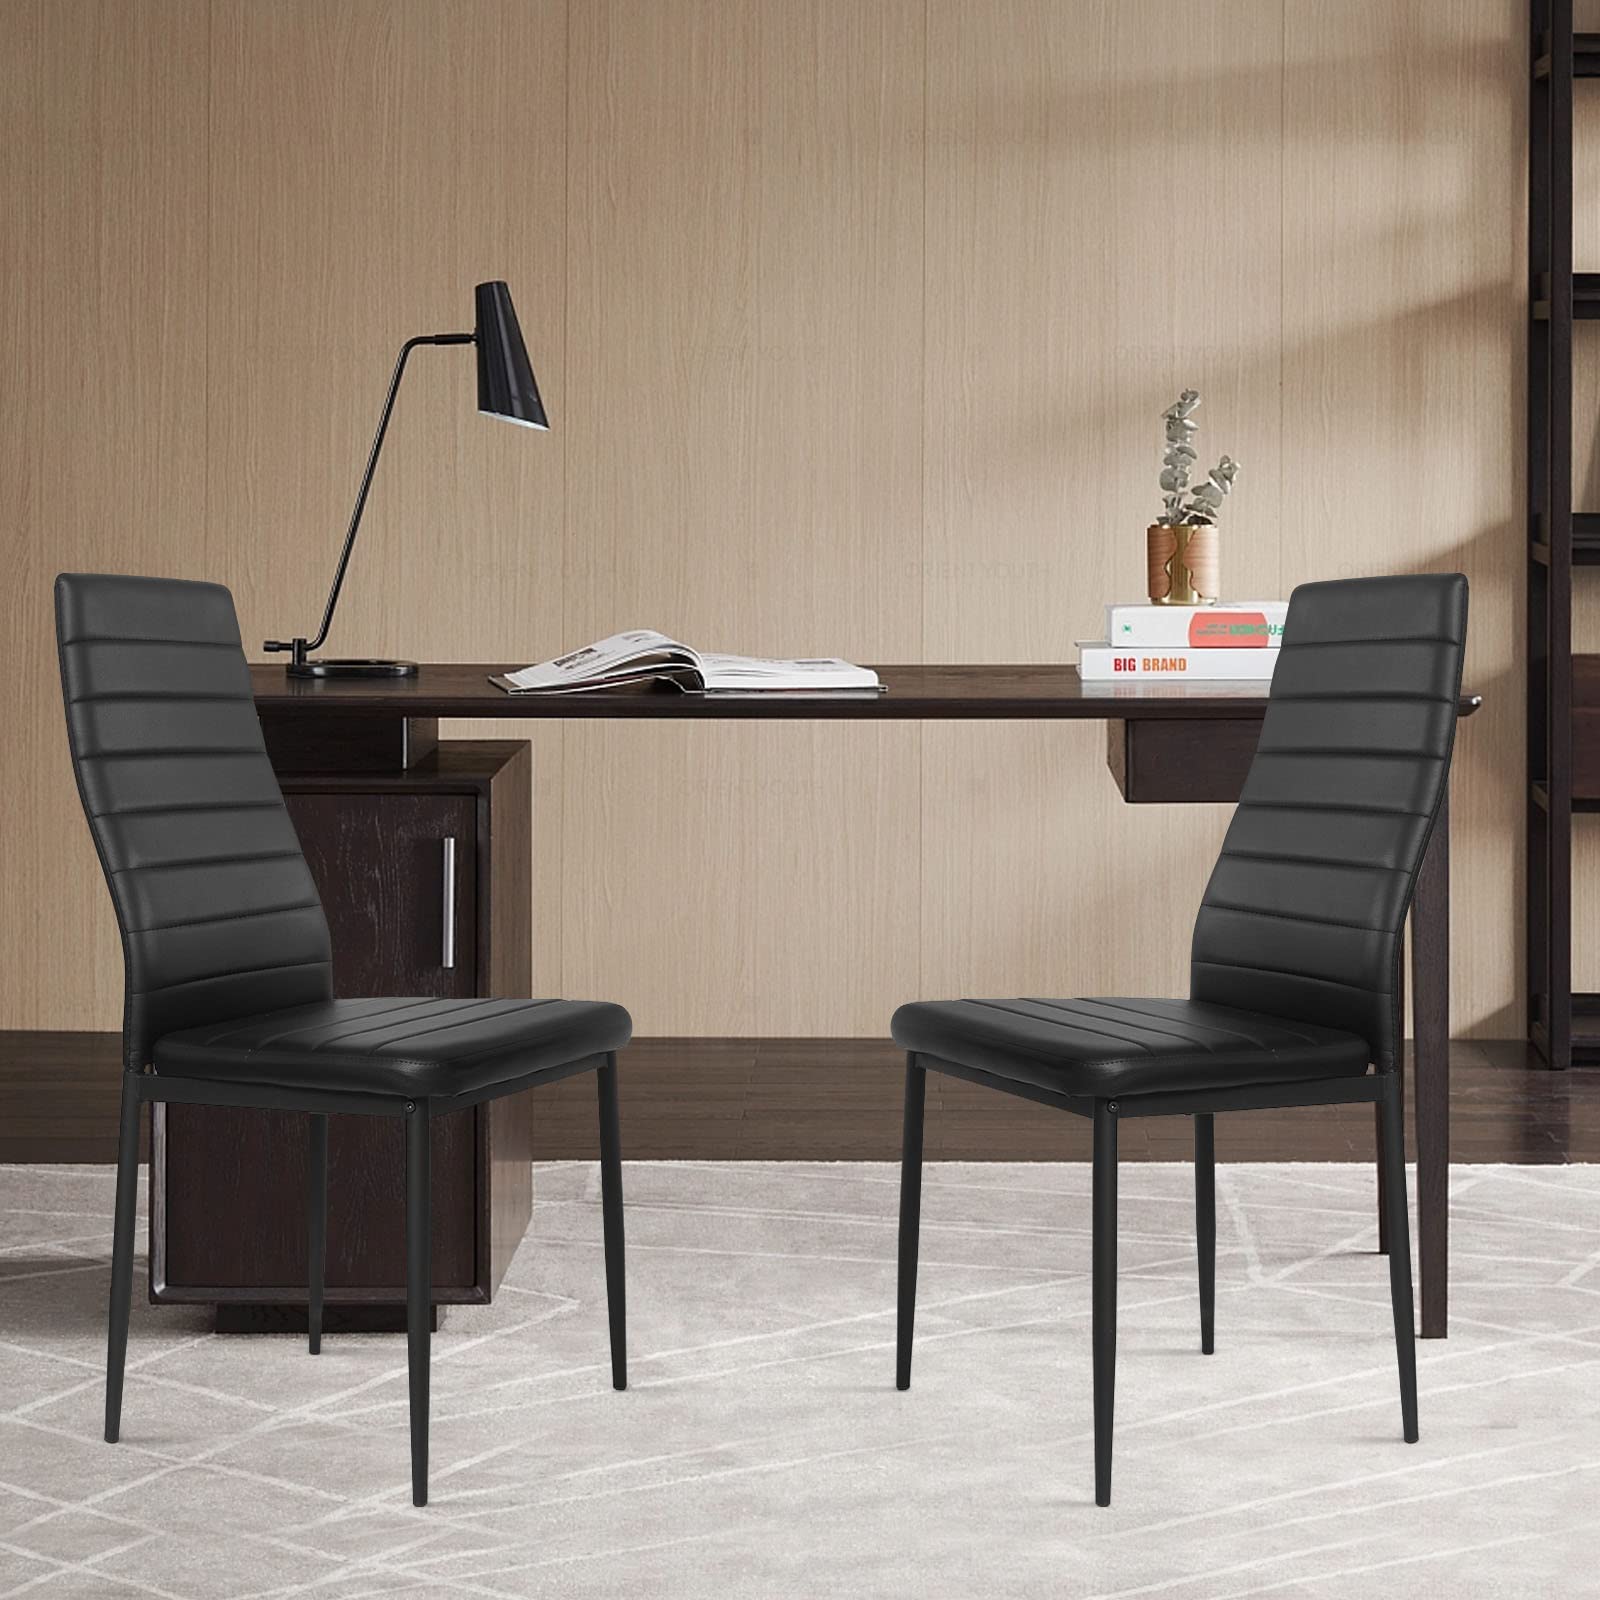 Giantex Set of 4 Dining Chairs, Upholstered Dining Side Chairs with Stain-Proof PVC Leather